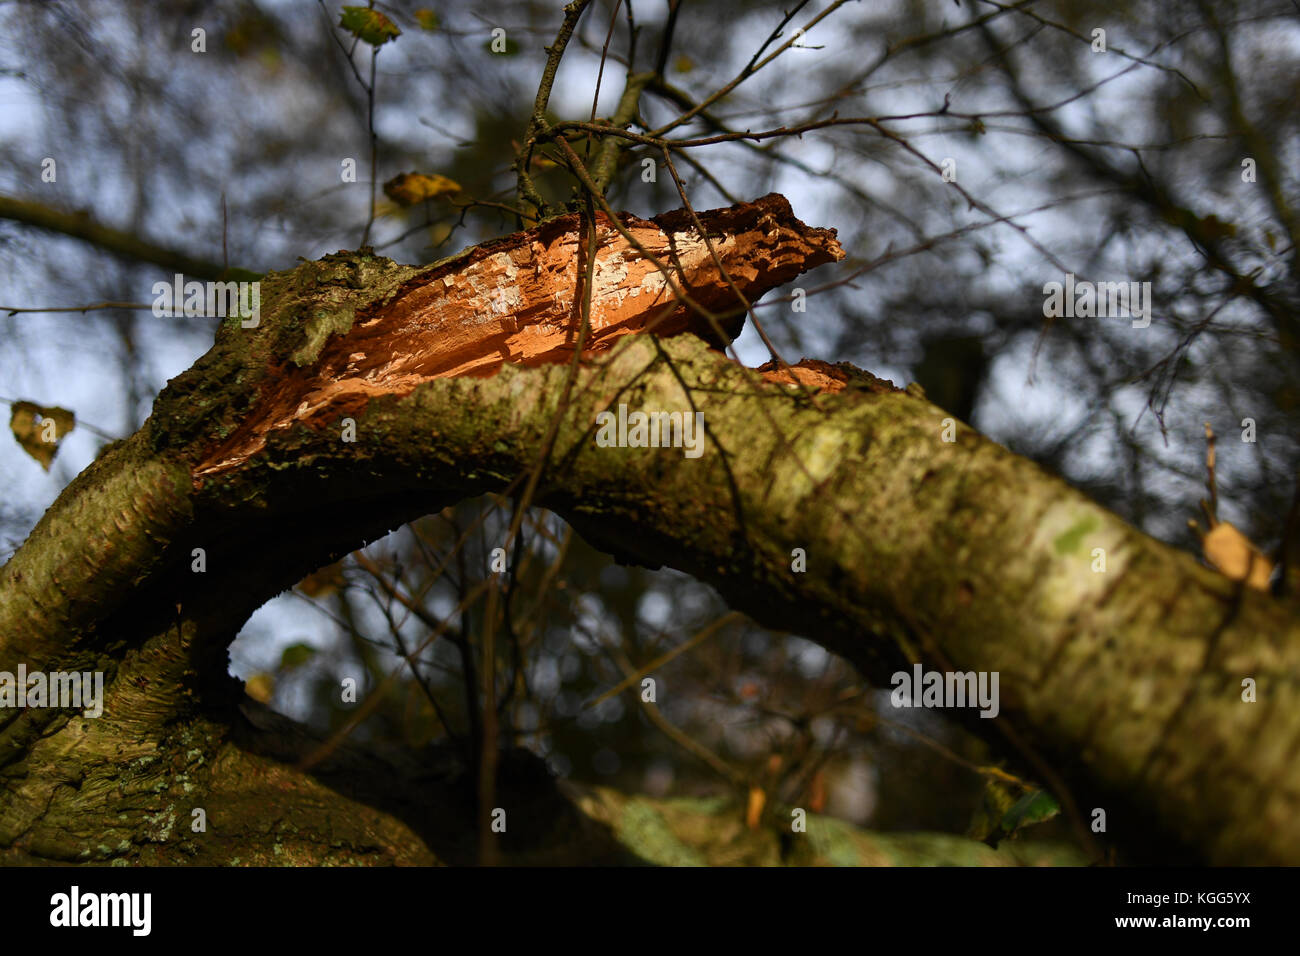 A broken large tree branch snapped open showing inside of bark Stock Photo